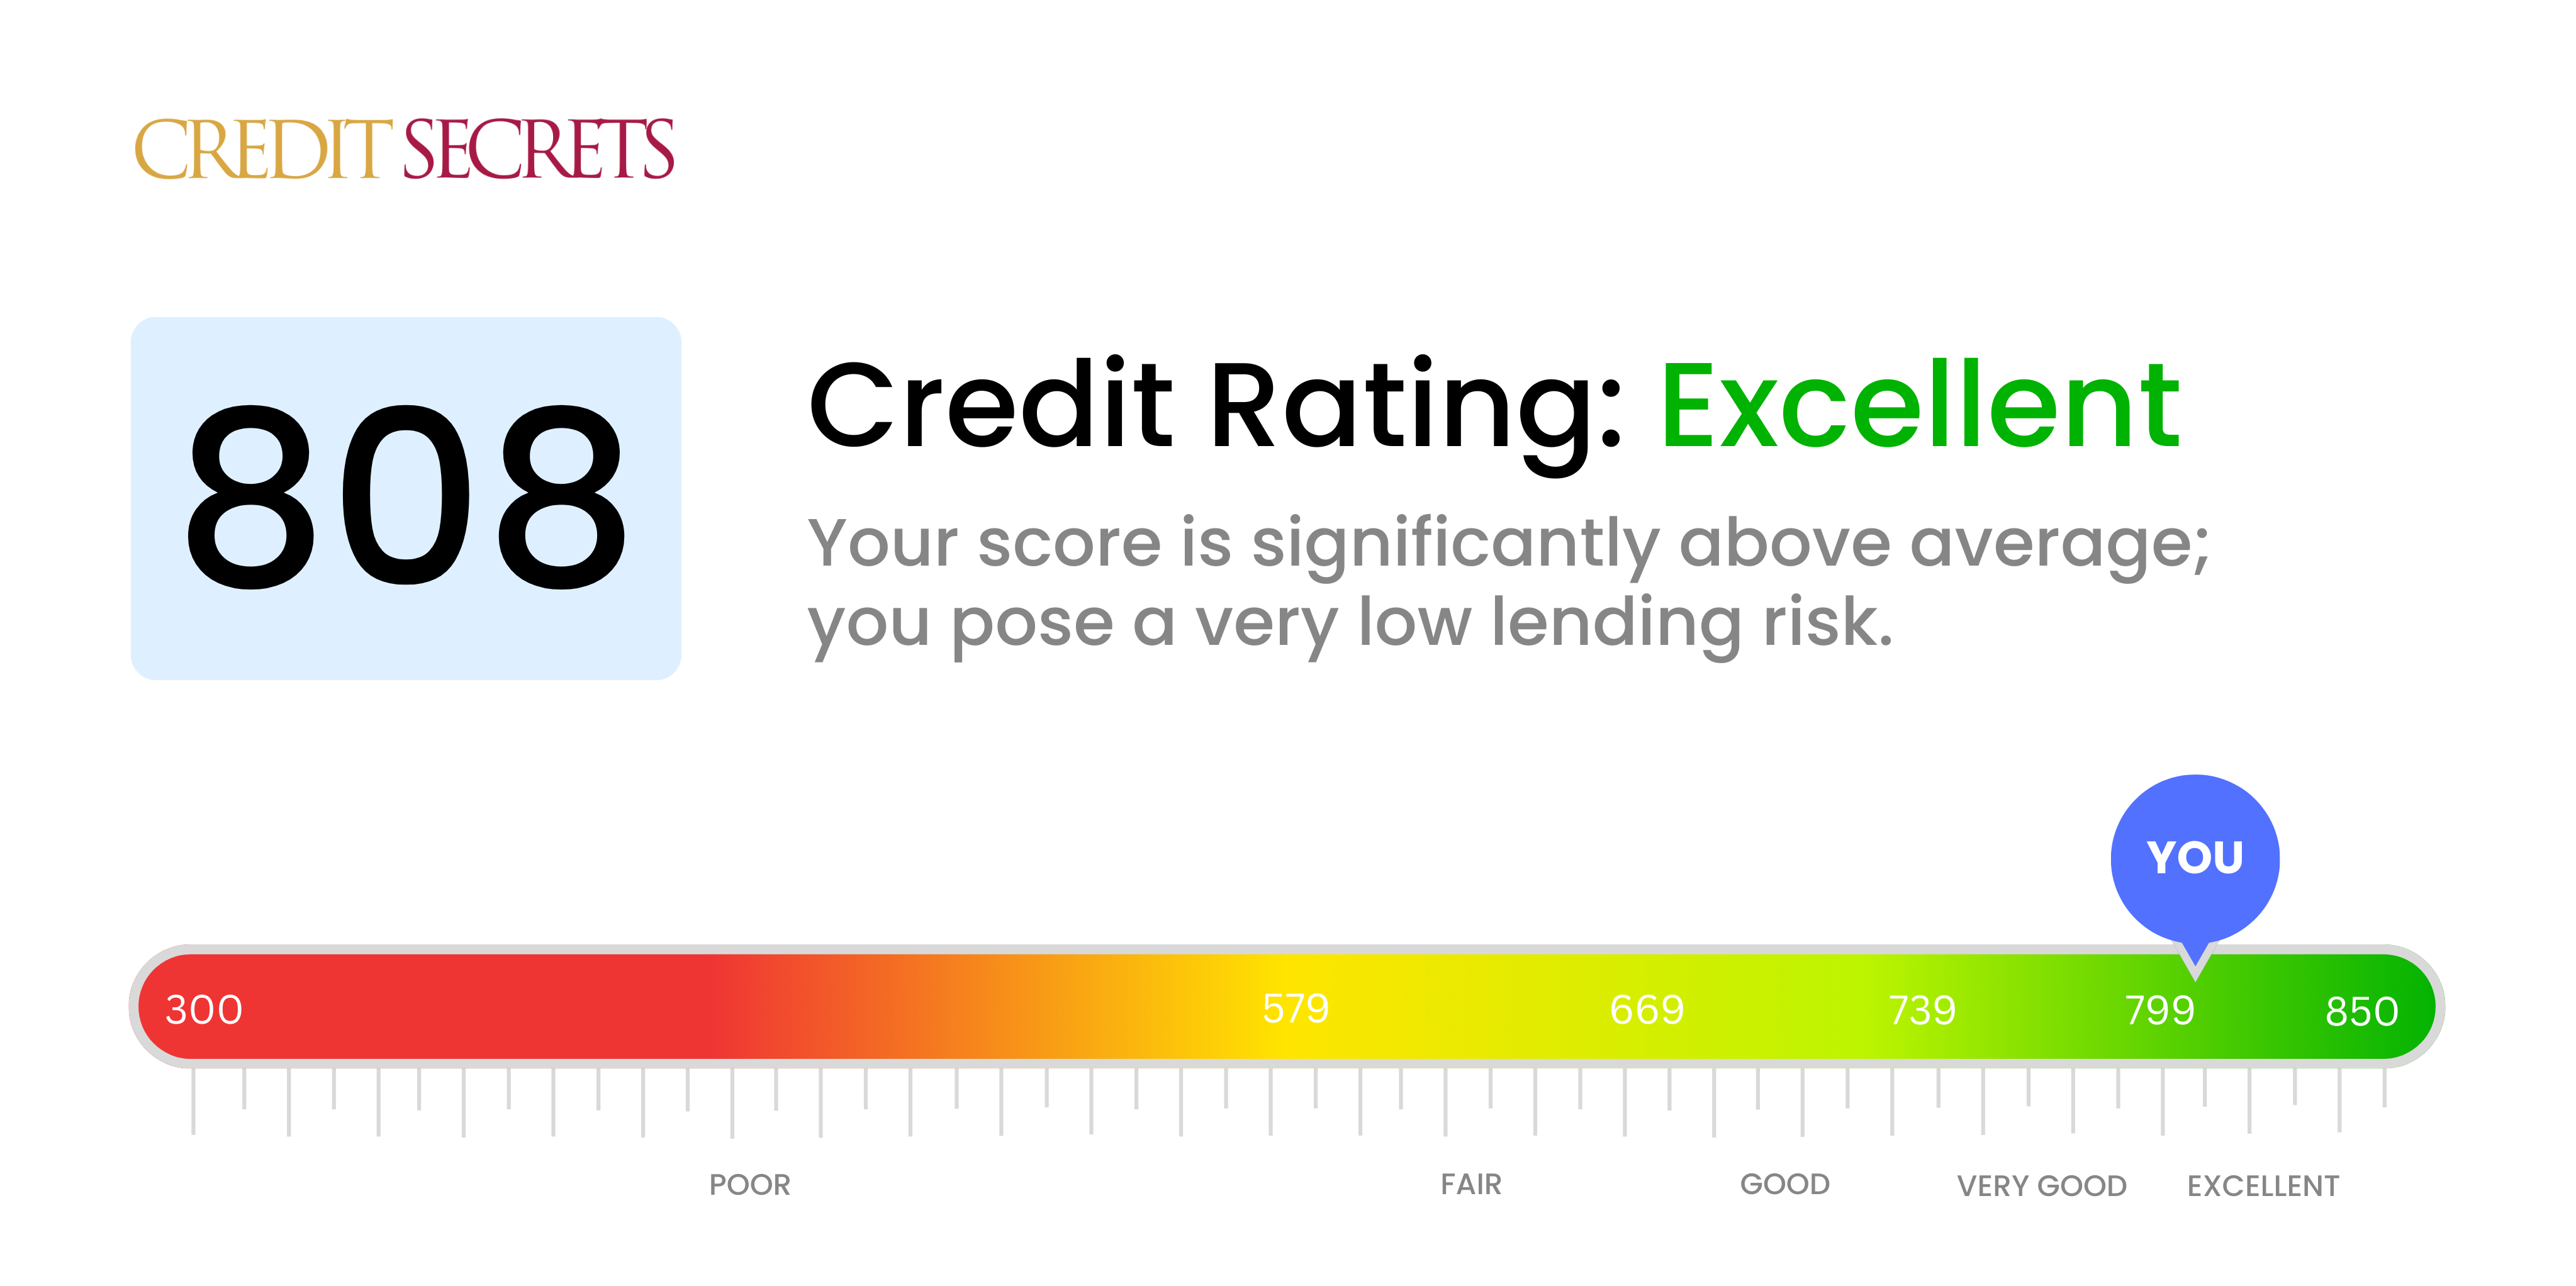 Is 808 a good credit score?